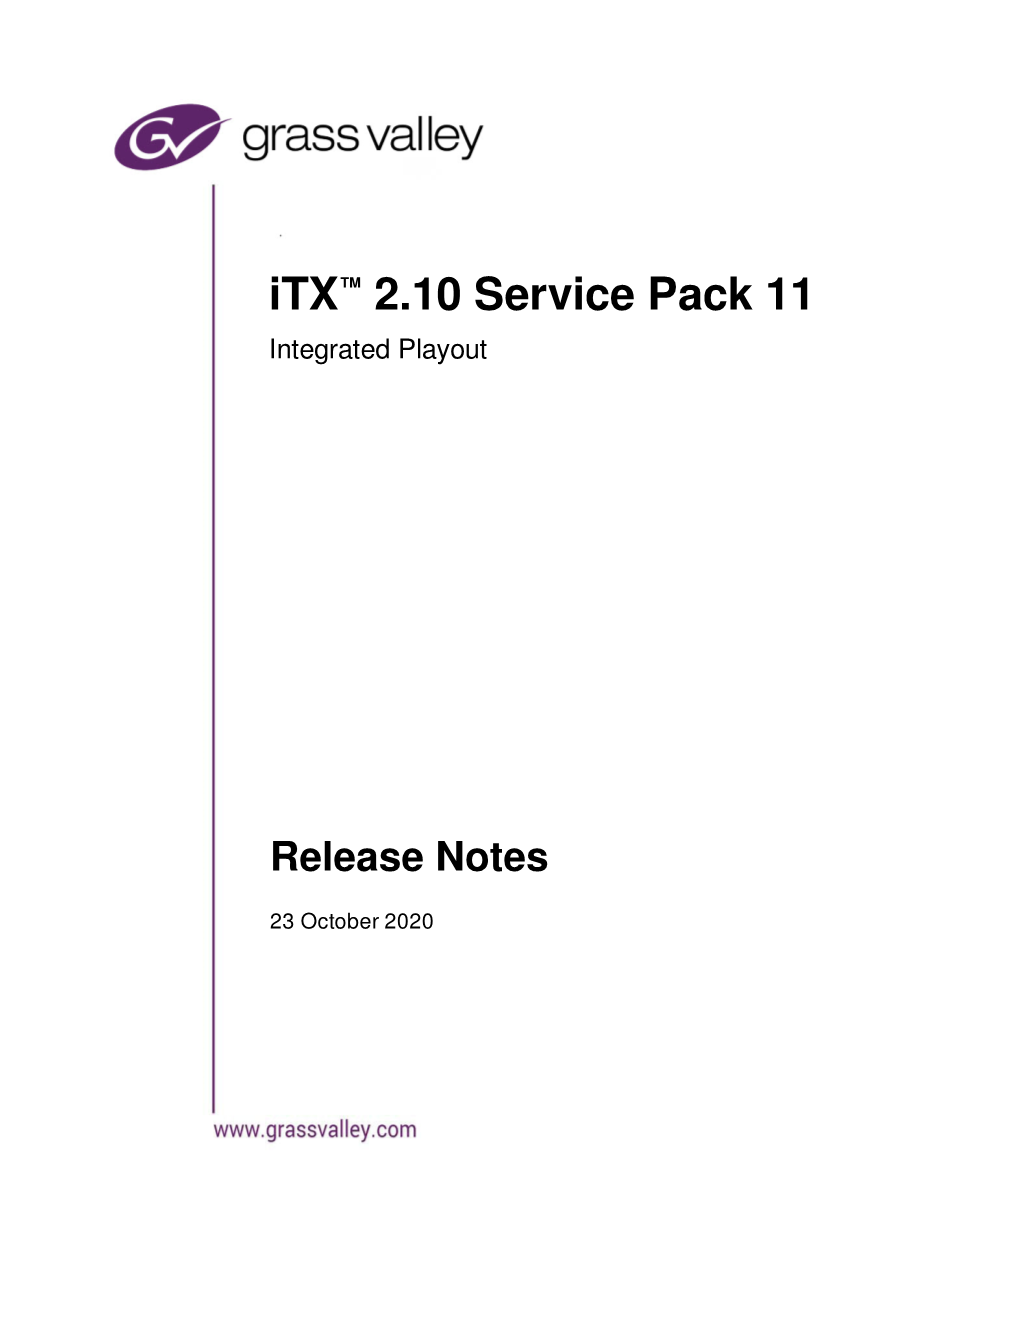 Itx Release Notes 2.10 SP11